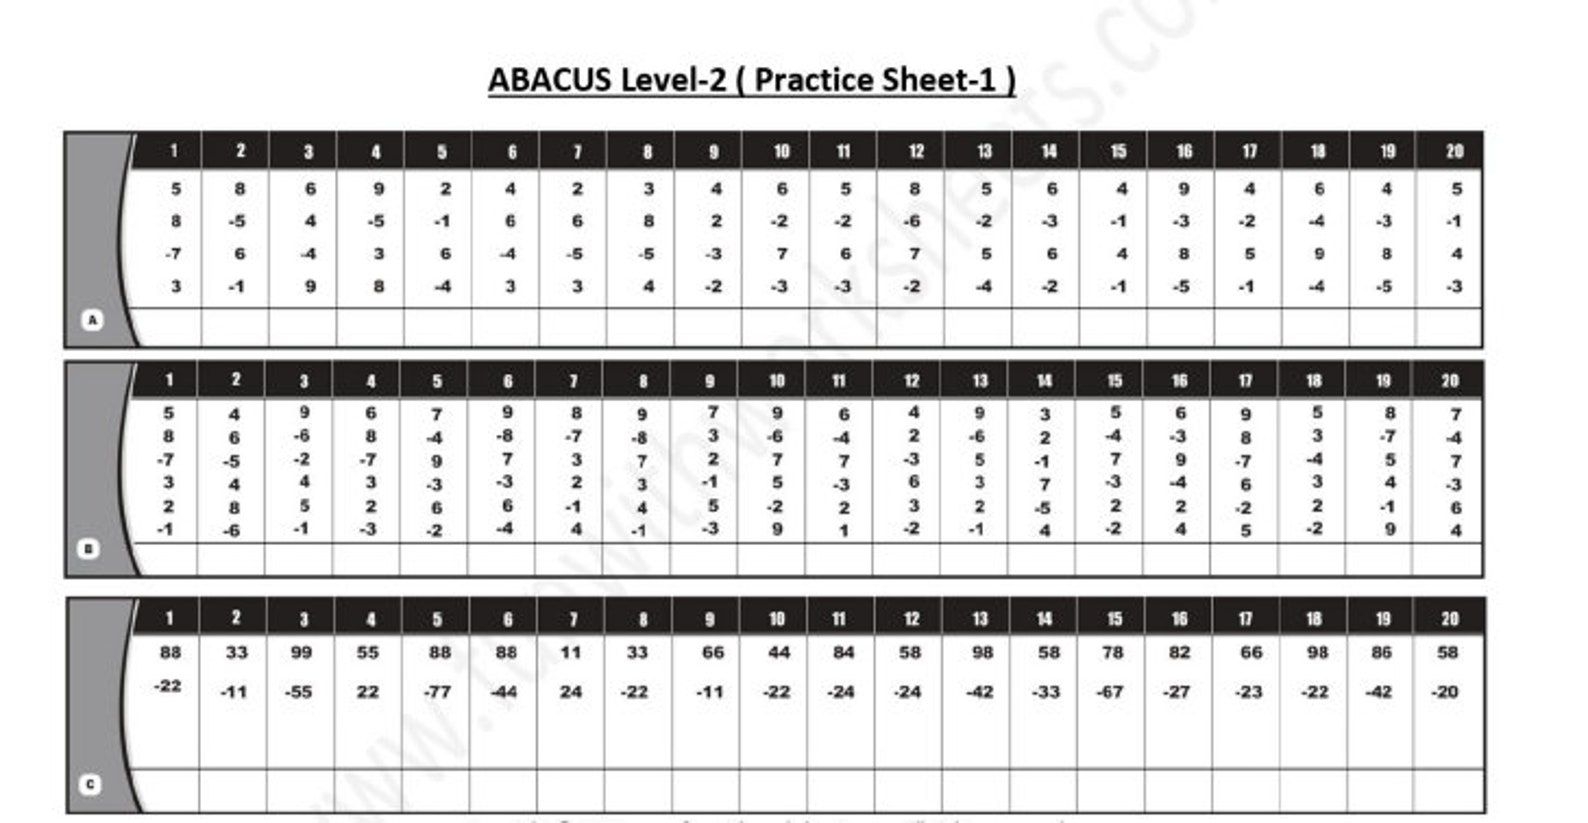 Buy Abacus Practice Worksheets Printable Practice Worksheets For Abacus Level 1 2 And 3 Mathematics Learning 27 Printable Worksheets Online In India Etsy Practices Worksheets Abacus Worksheets - Free Printable Abacus Worksheets